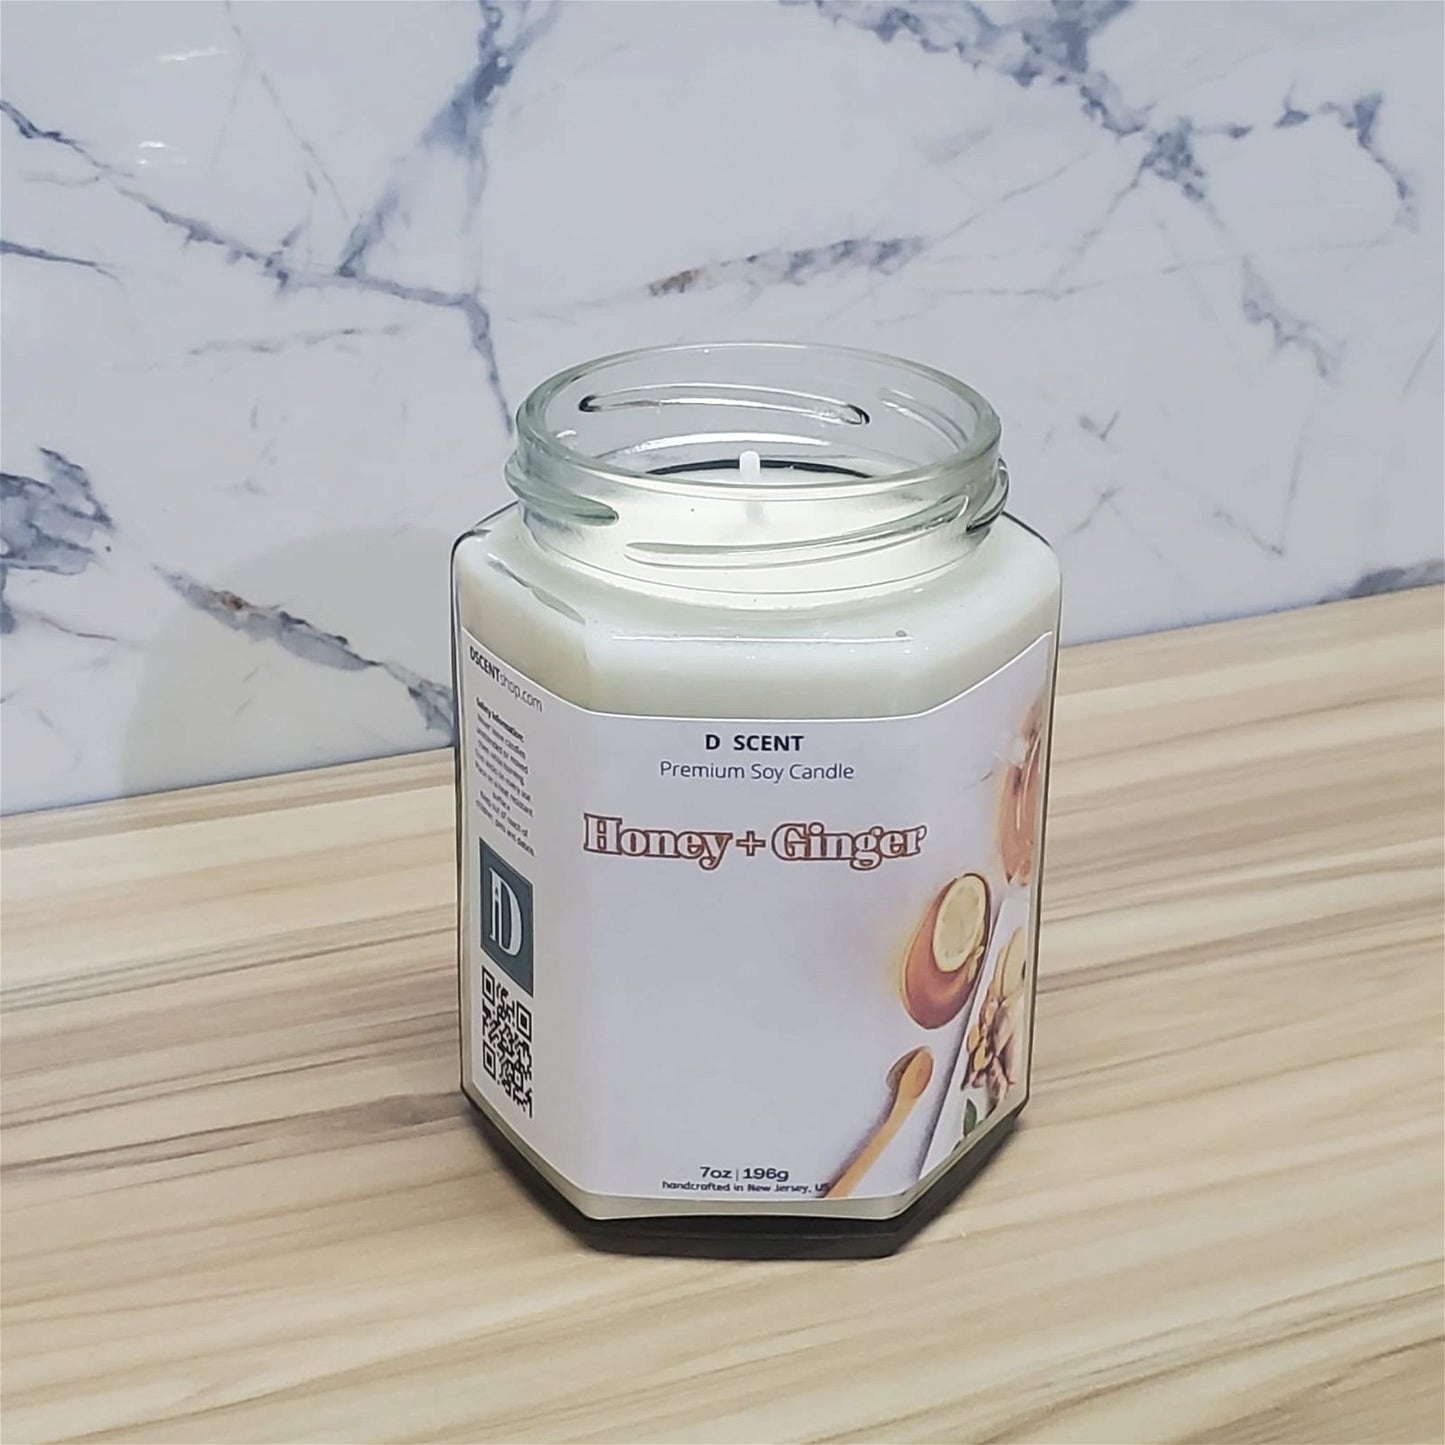 Honey and Ginger Soy Candle | Large Hex Jar - D SCENT 